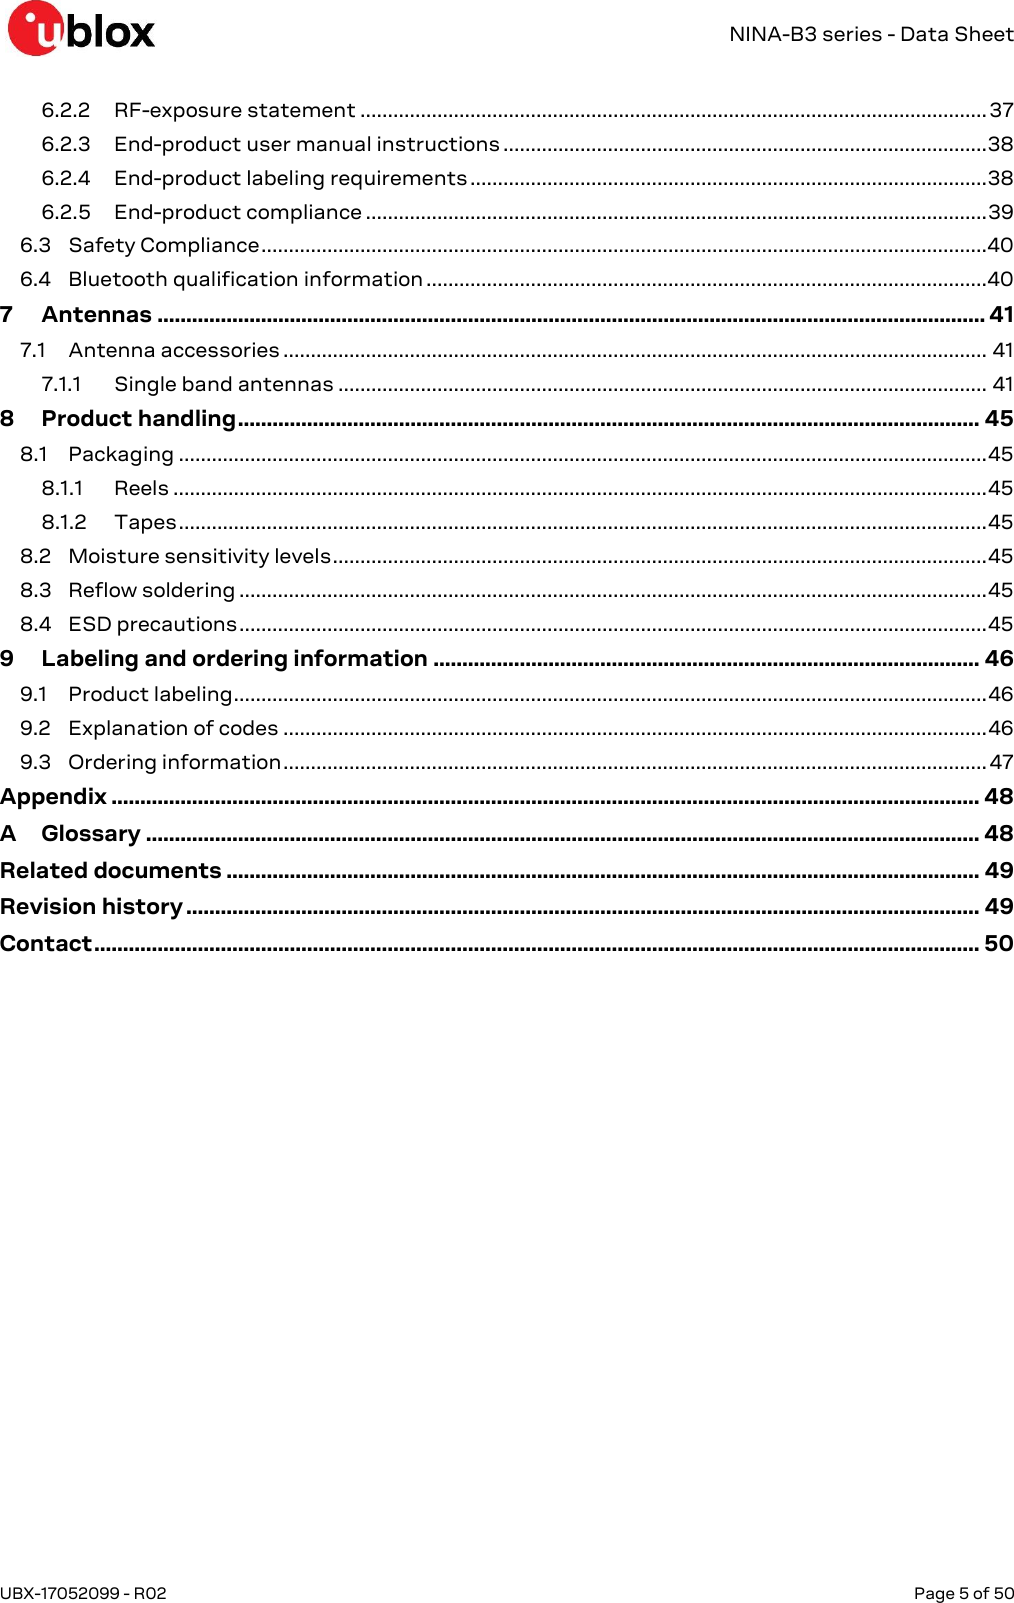   NINA-B3 series - Data Sheet UBX-17052099 - R02  Page 5 of 50      6.2.2 RF-exposure statement .................................................................................................................. 37 6.2.3 End-product user manual instructions ........................................................................................ 38 6.2.4 End-product labeling requirements .............................................................................................. 38 6.2.5 End-product compliance ................................................................................................................. 39 6.3 Safety Compliance .................................................................................................................................... 40 6.4 Bluetooth qualification information ...................................................................................................... 40 7 Antennas ................................................................................................................................................ 41 7.1 Antenna accessories ................................................................................................................................ 41 7.1.1 Single band antennas ...................................................................................................................... 41 8 Product handling ................................................................................................................................. 45 8.1 Packaging ................................................................................................................................................... 45 8.1.1 Reels .................................................................................................................................................... 45 8.1.2 Tapes ................................................................................................................................................... 45 8.2 Moisture sensitivity levels ....................................................................................................................... 45 8.3 Reflow soldering ........................................................................................................................................ 45 8.4 ESD precautions ........................................................................................................................................ 45 9 Labeling and ordering information ............................................................................................... 46 9.1 Product labeling ......................................................................................................................................... 46 9.2 Explanation of codes ................................................................................................................................ 46 9.3 Ordering information ................................................................................................................................ 47 Appendix ....................................................................................................................................................... 48 A Glossary ................................................................................................................................................. 48 Related documents ................................................................................................................................... 49 Revision history .......................................................................................................................................... 49 Contact .......................................................................................................................................................... 50  